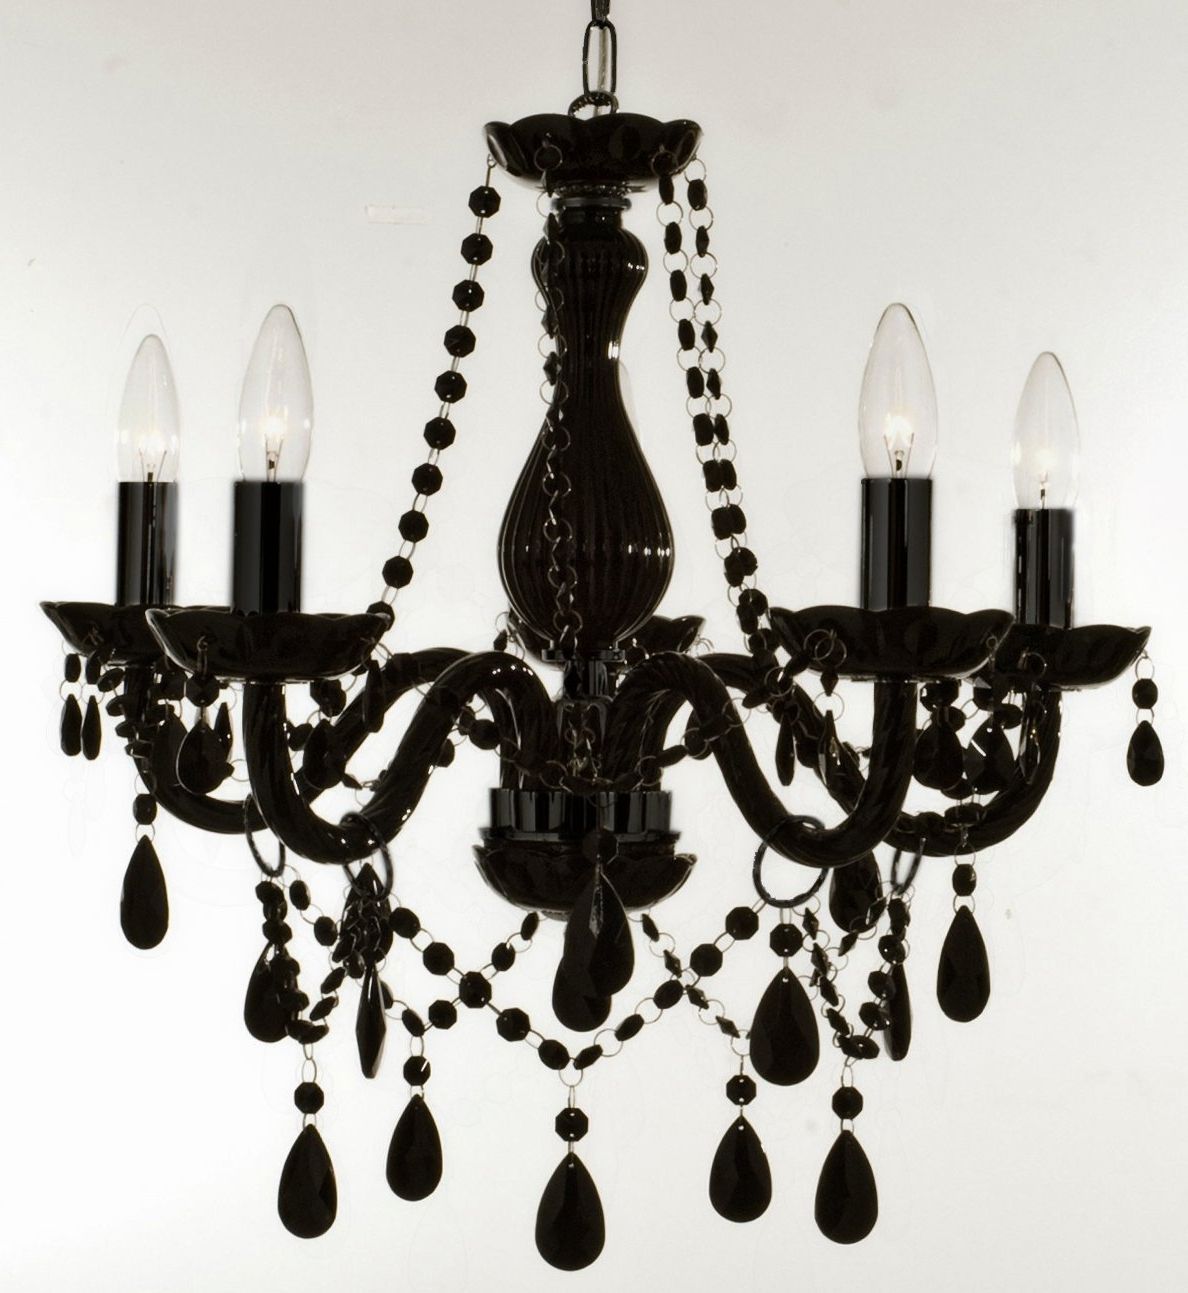 Hanging Candelabra Chandeliers Within Well Liked Chandeliers Design : Wonderful Black Wrought Iron Candle Chandelier (View 10 of 15)